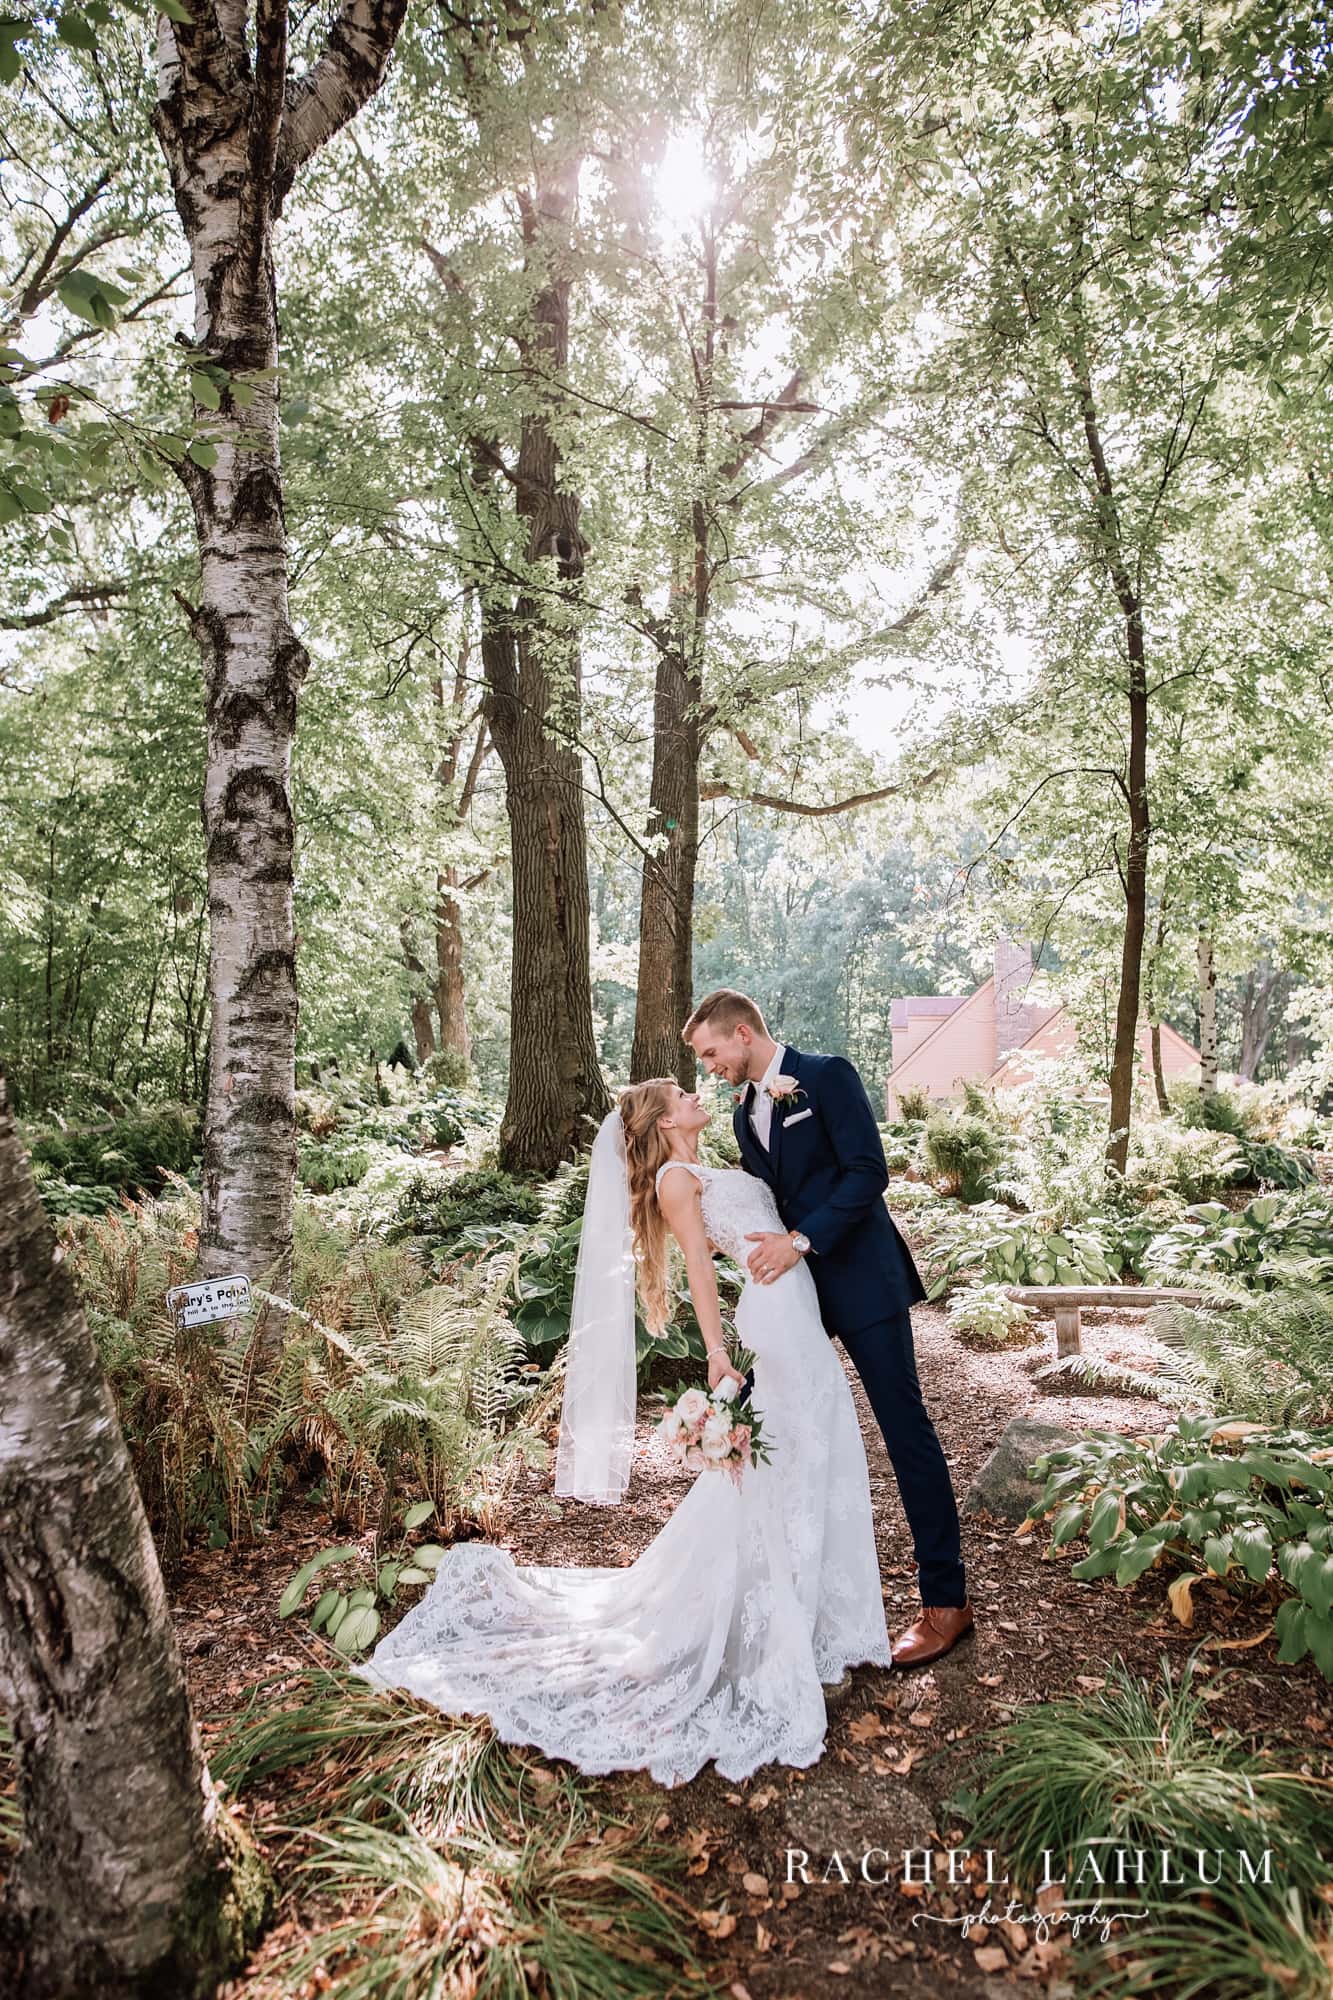 A bride and groom pose in the woods at Panola Valley Gardens for their wedding photography.